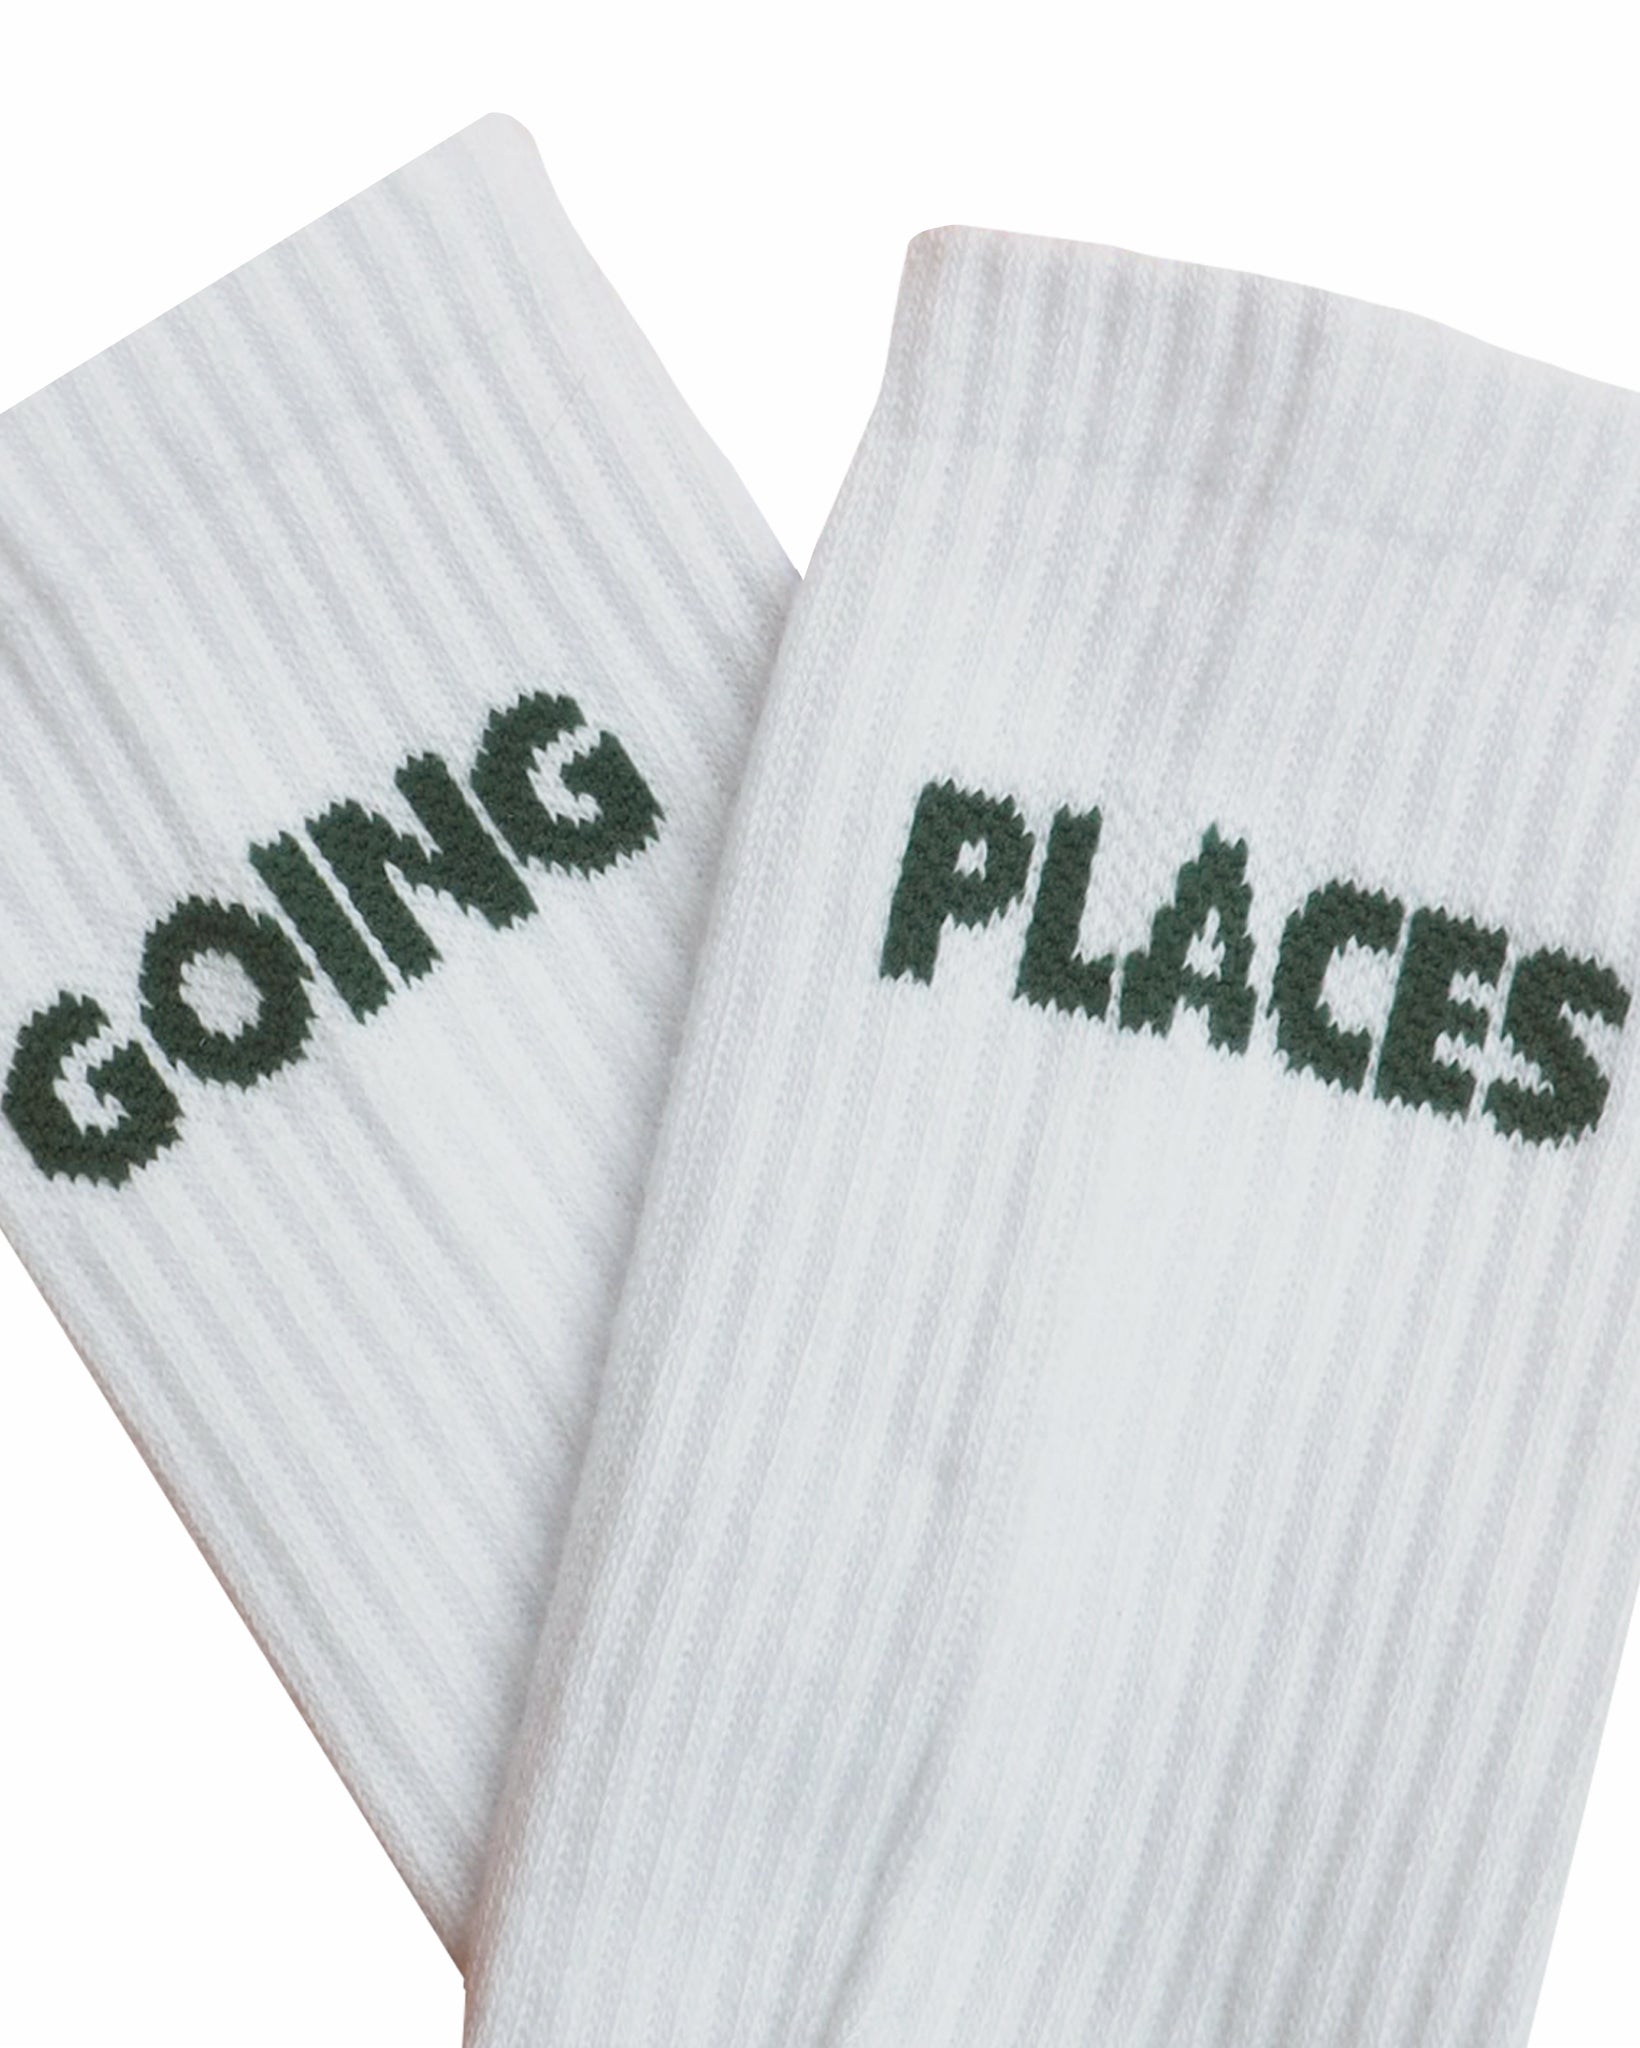 Going Places Socks